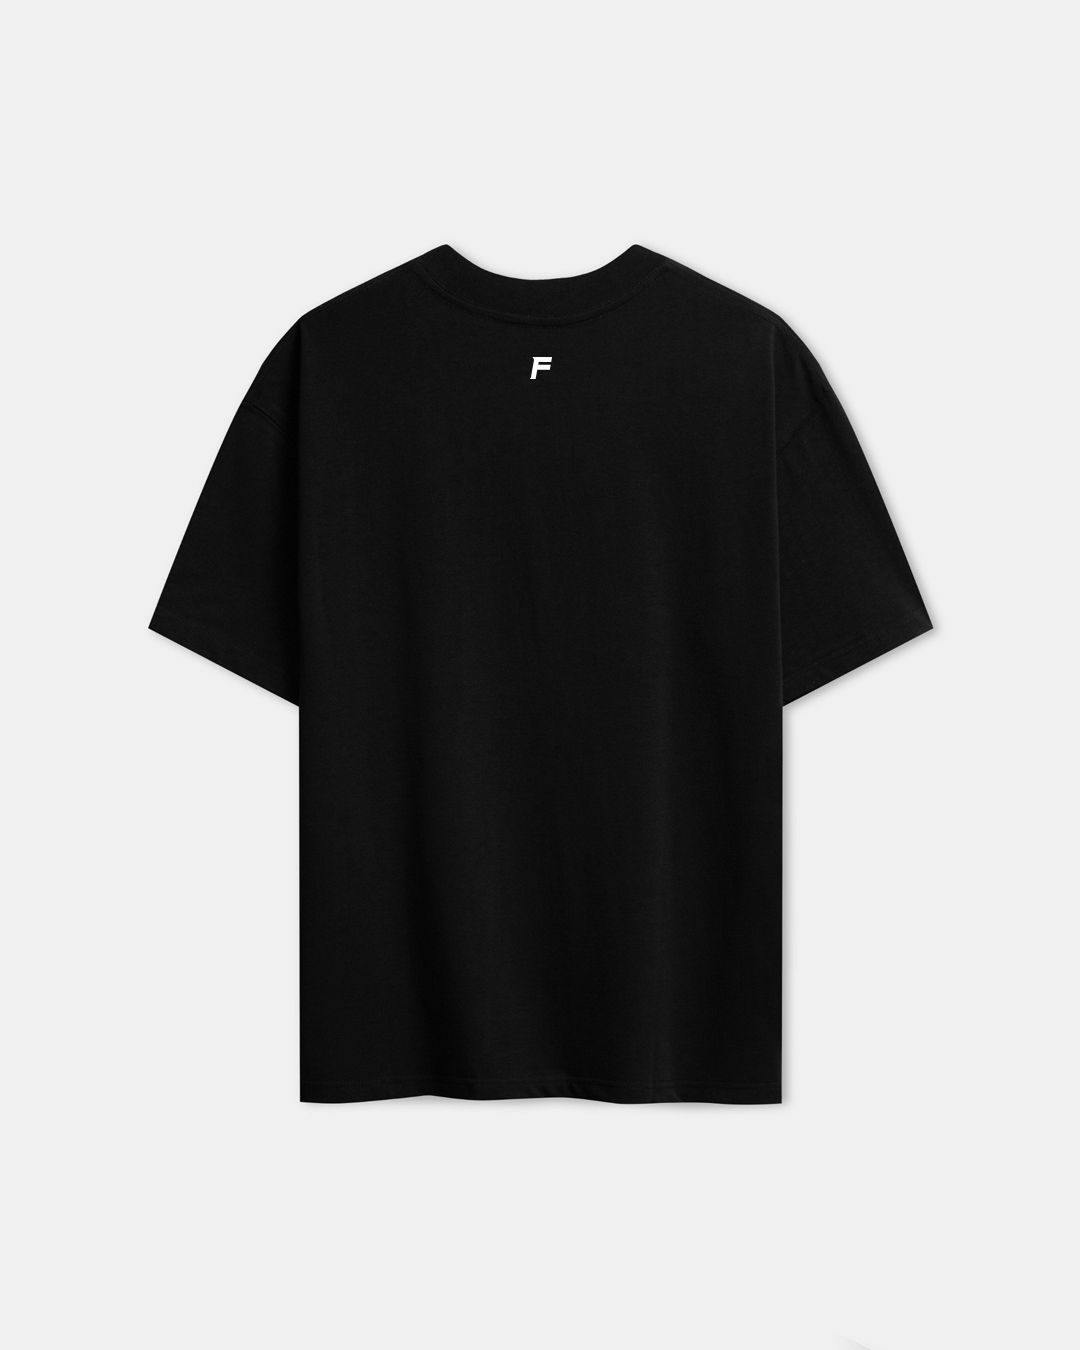  TSG23 - MADE TO THRIVE OVERFIT TEE - BLACK 